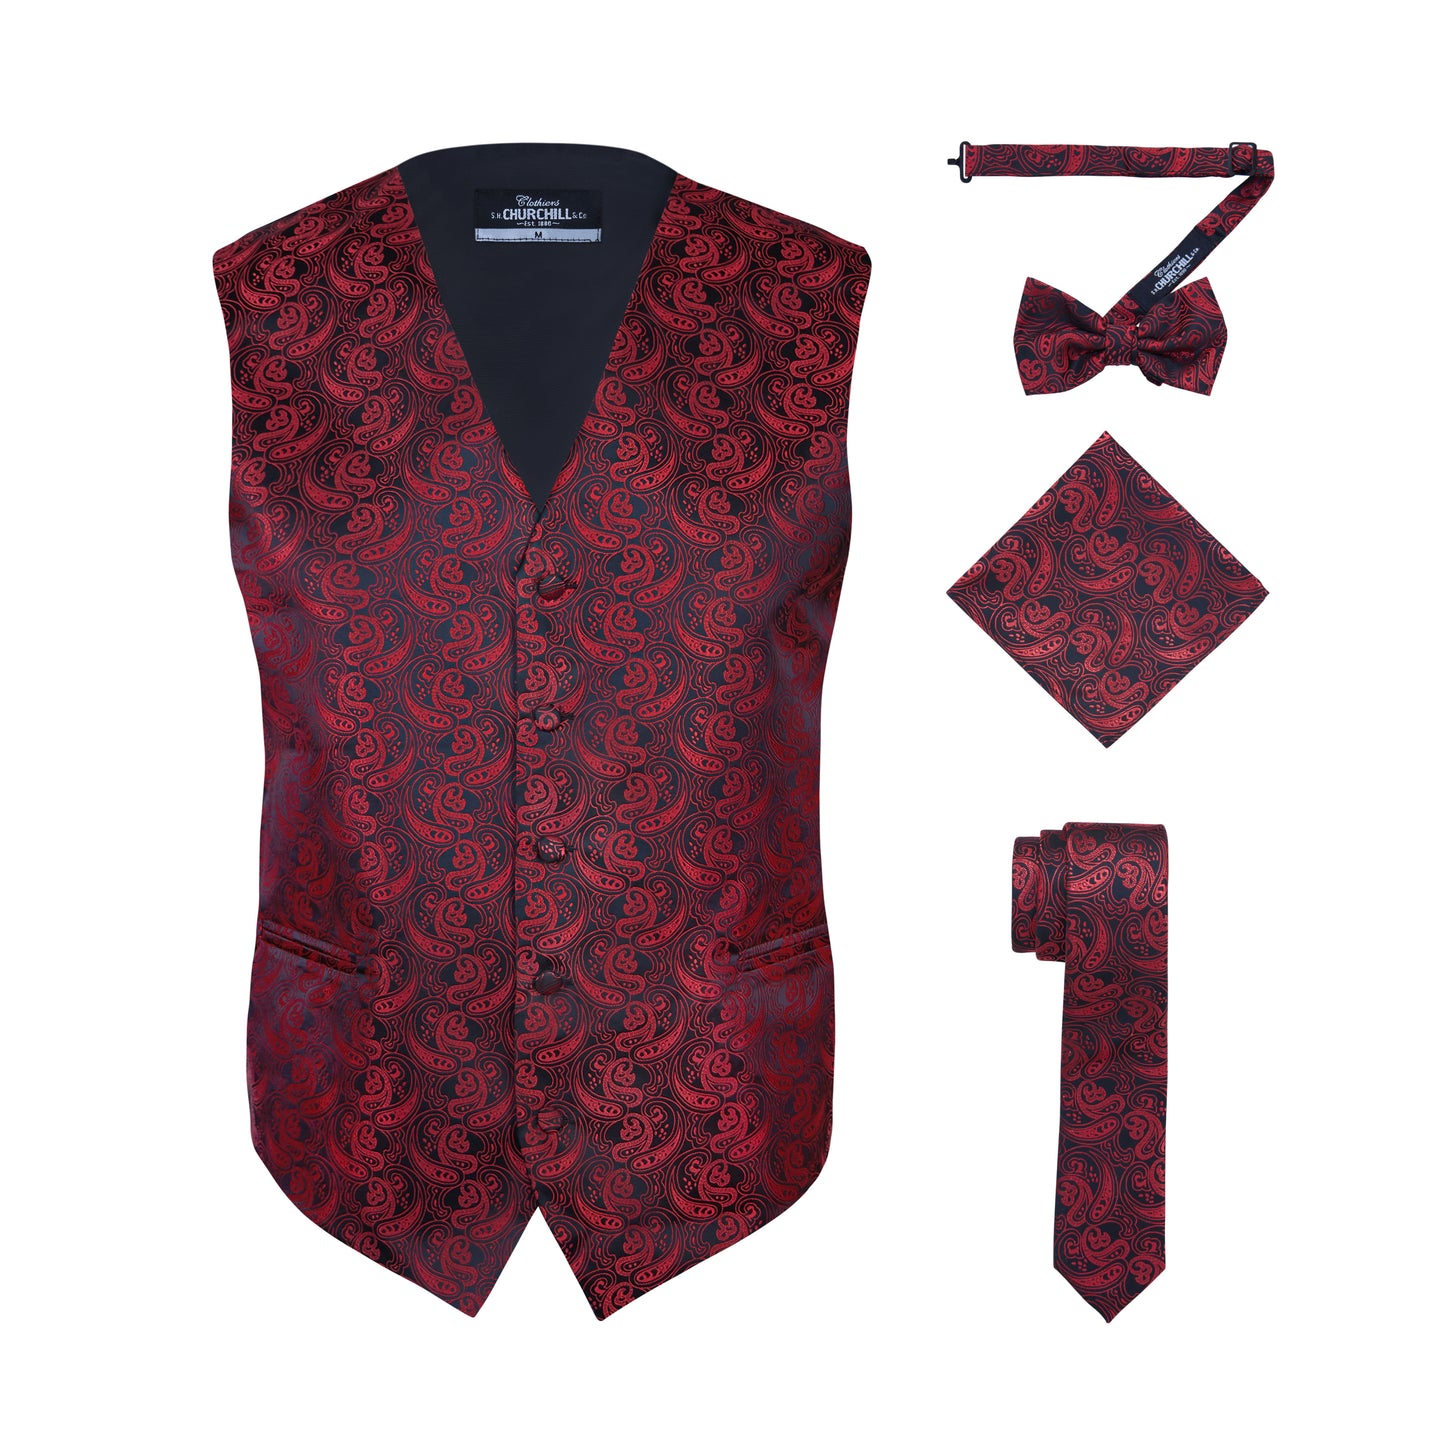 S.H. Churchill & Co. Men's Red/Black Paisley Vest Set, with Bow Tie, Neck Tie and Pocket Hanky